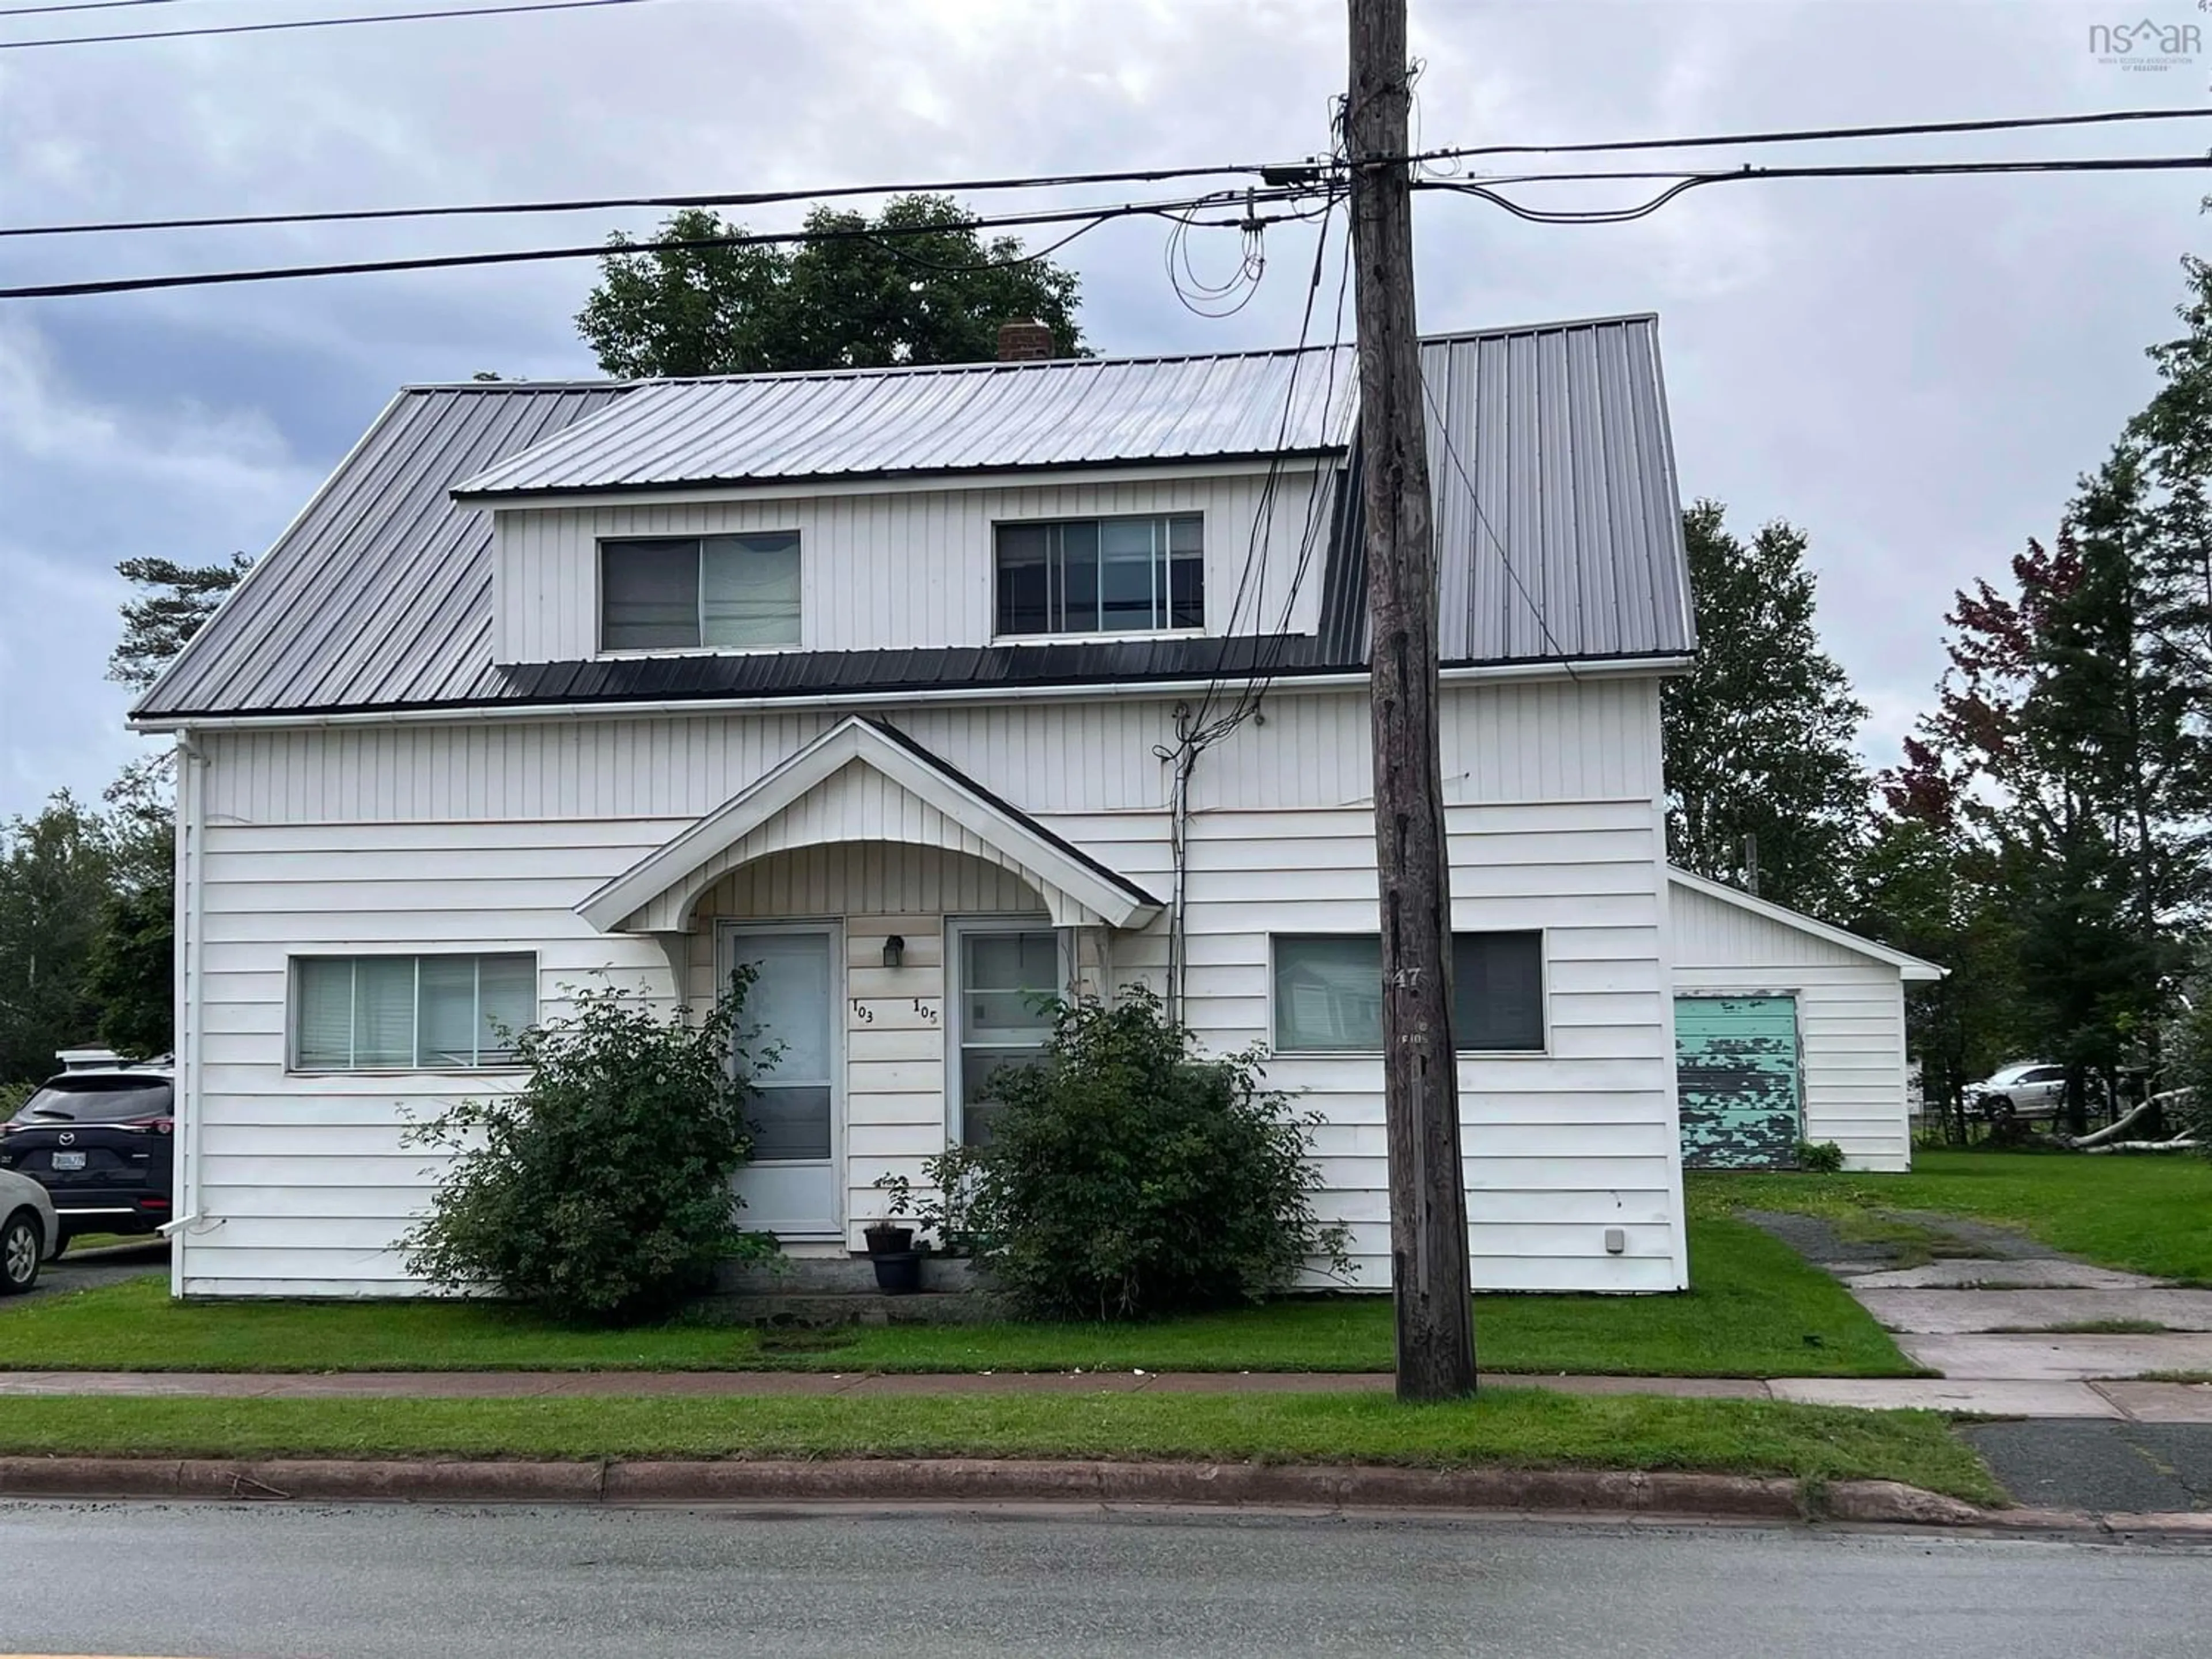 Home with unknown exterior material for 103-105 Acadia Ave, Stellarton Nova Scotia B0K 1S0